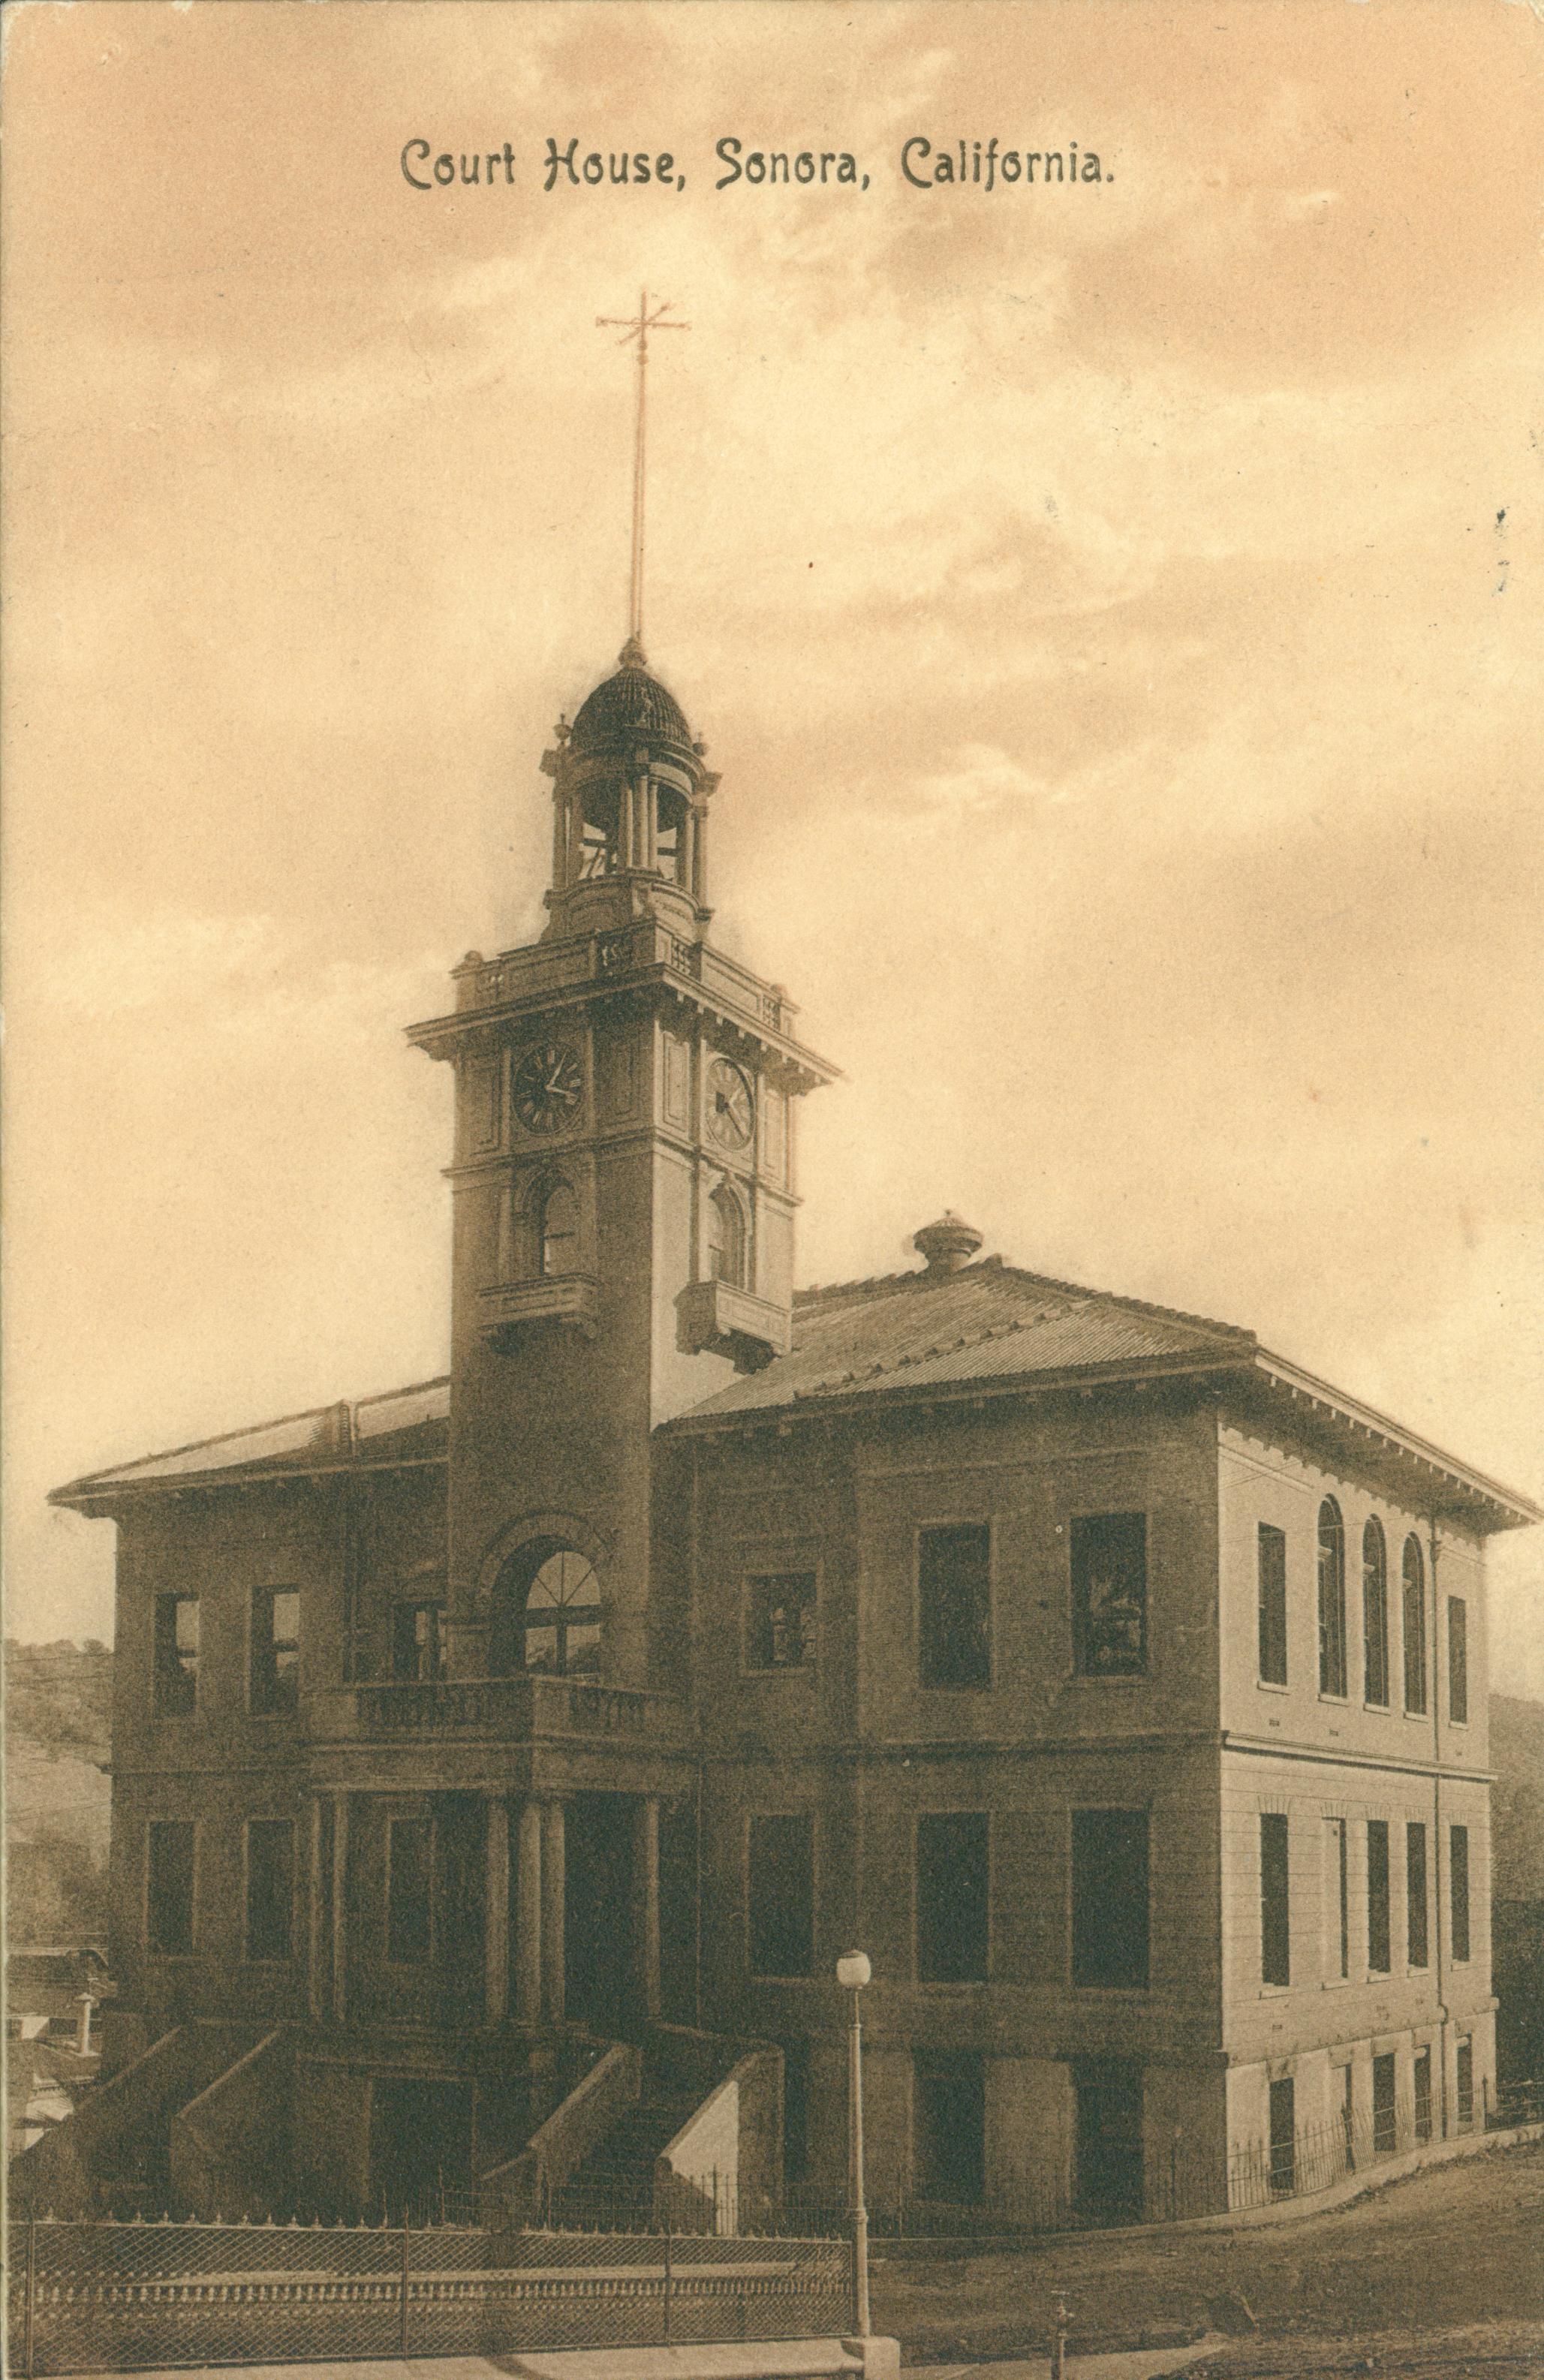 Shows a front corner view of the courthouse in Sonora